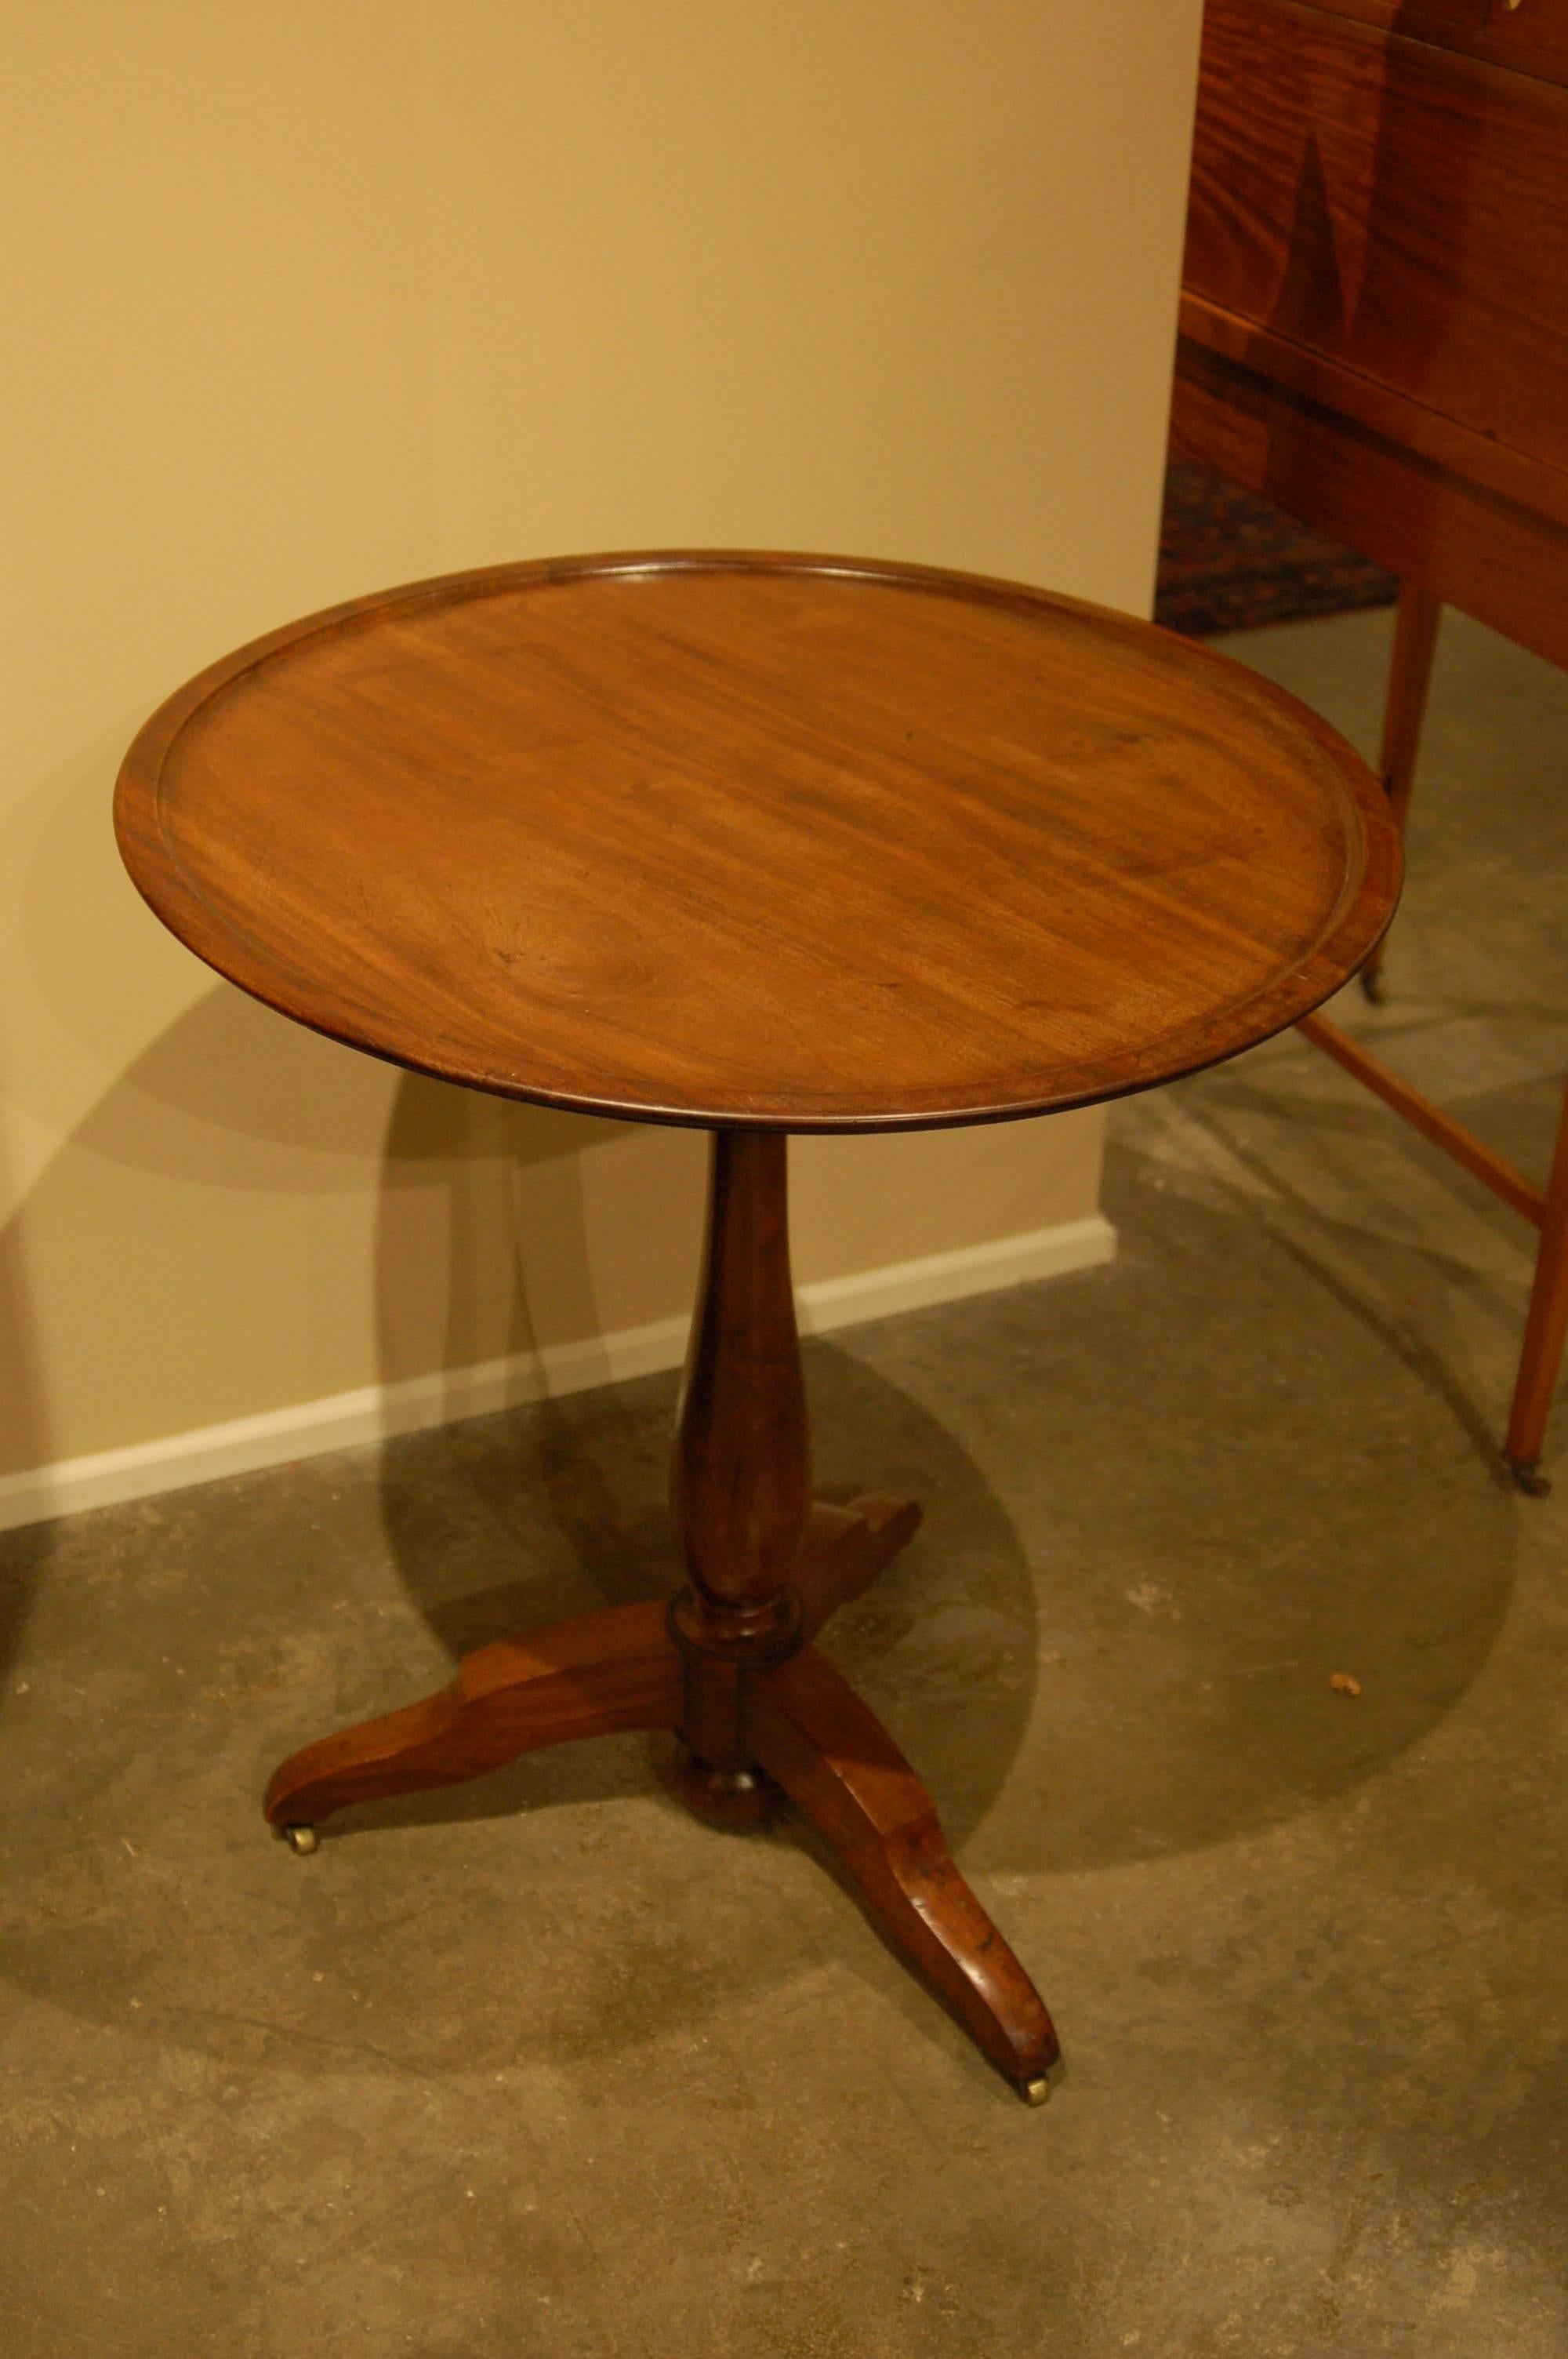 French walnut tilt-top table, carved dish top, original hardware and casters.